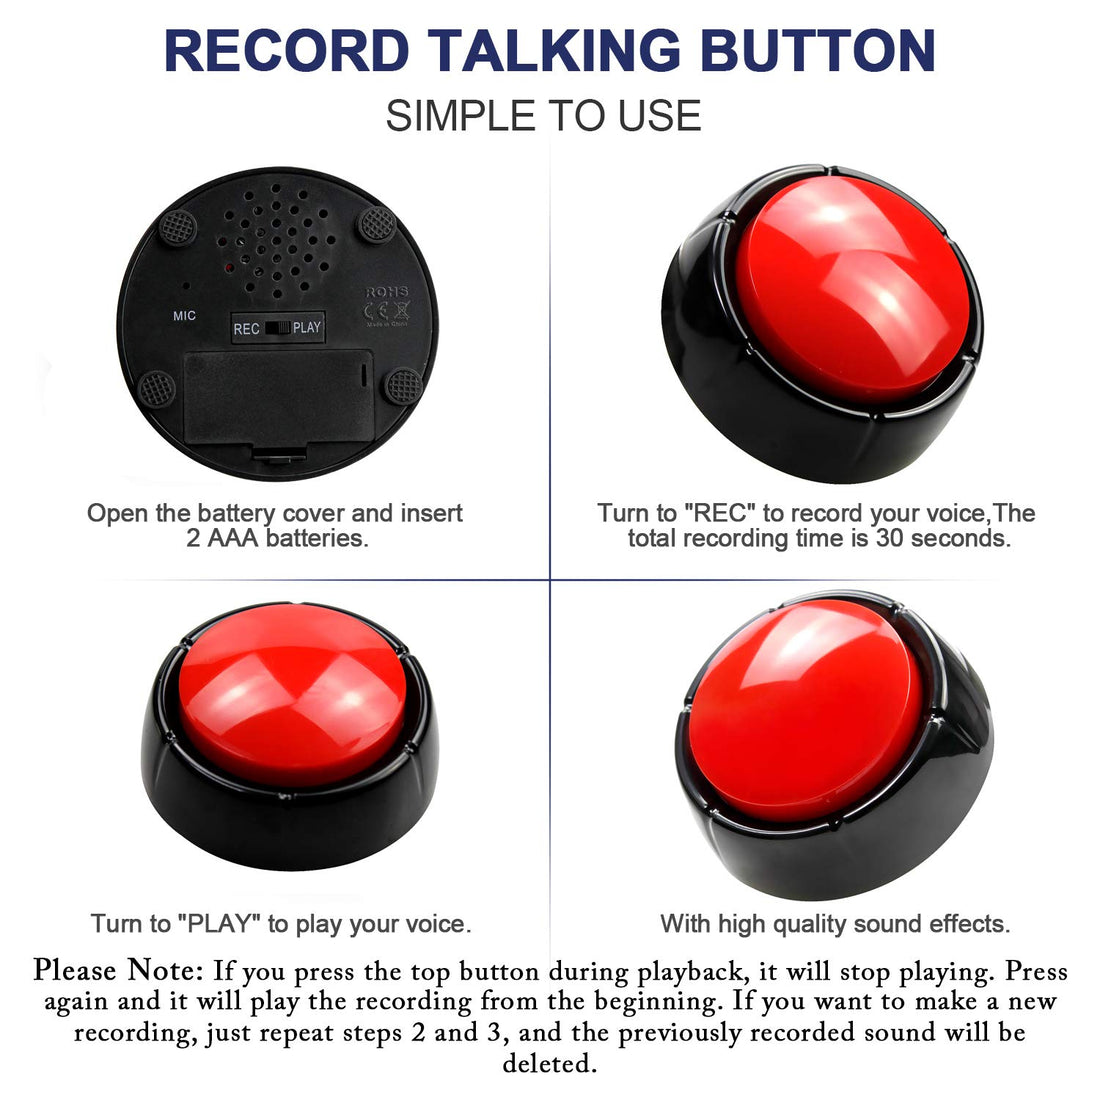 MakeSound Recordable Talking Button 30 Seconds Record Button Easy Button Answer Buzzers Custom Sound Button for Communication Study Office Home Game Gift(Batteries Included)